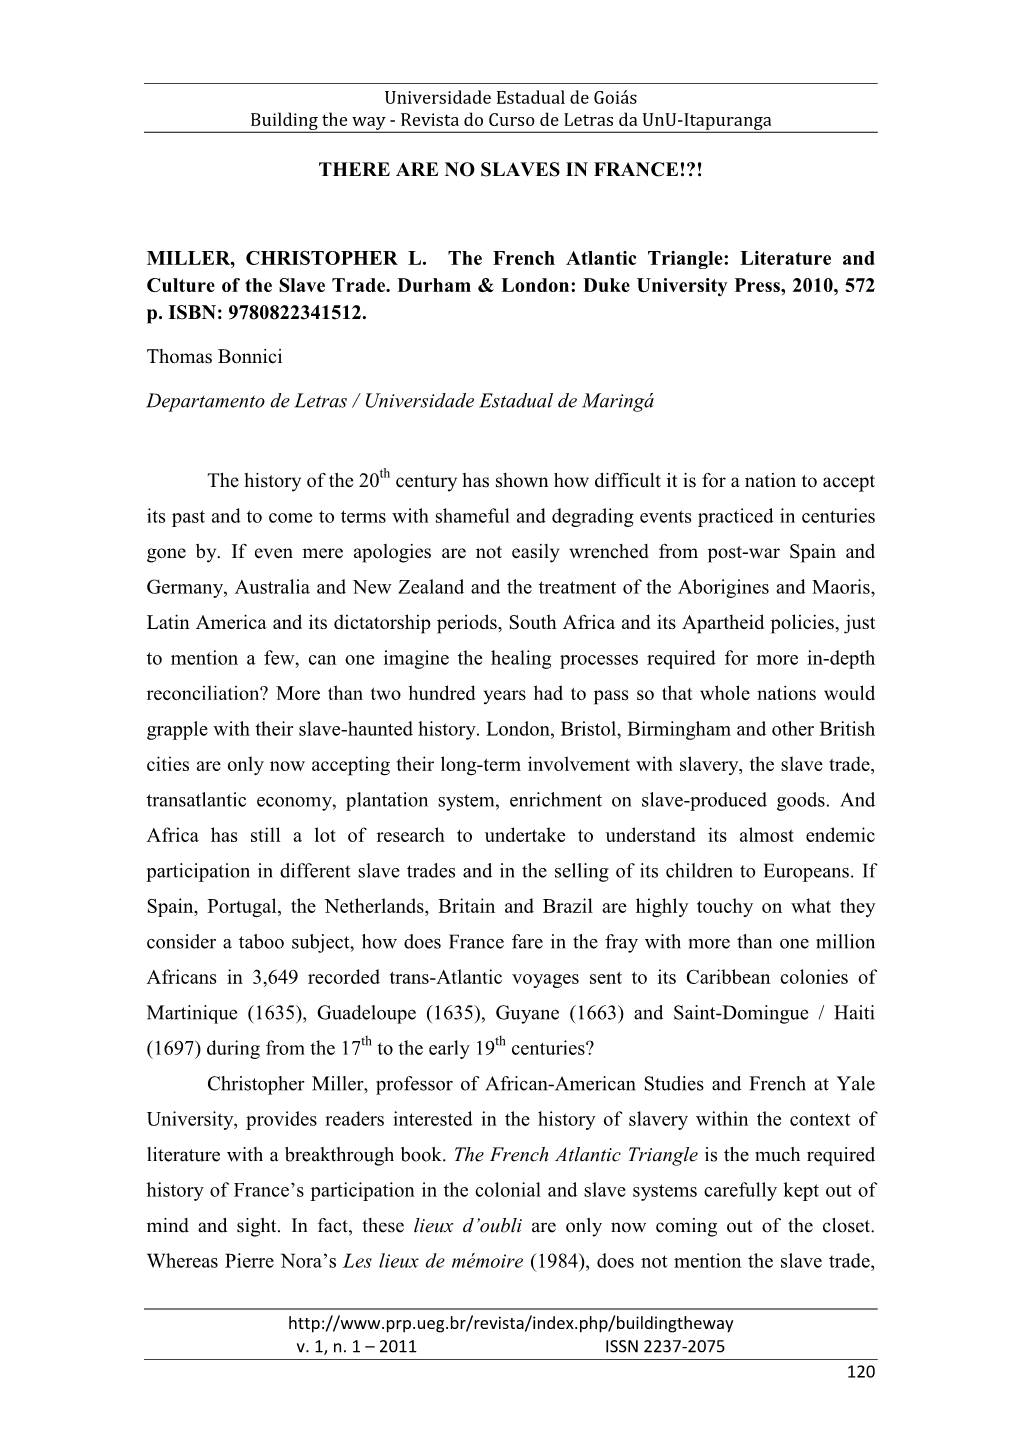 MILLER, CHRISTOPHER L. the French Atlantic Triangle: Literature and Culture of the Slave Trade